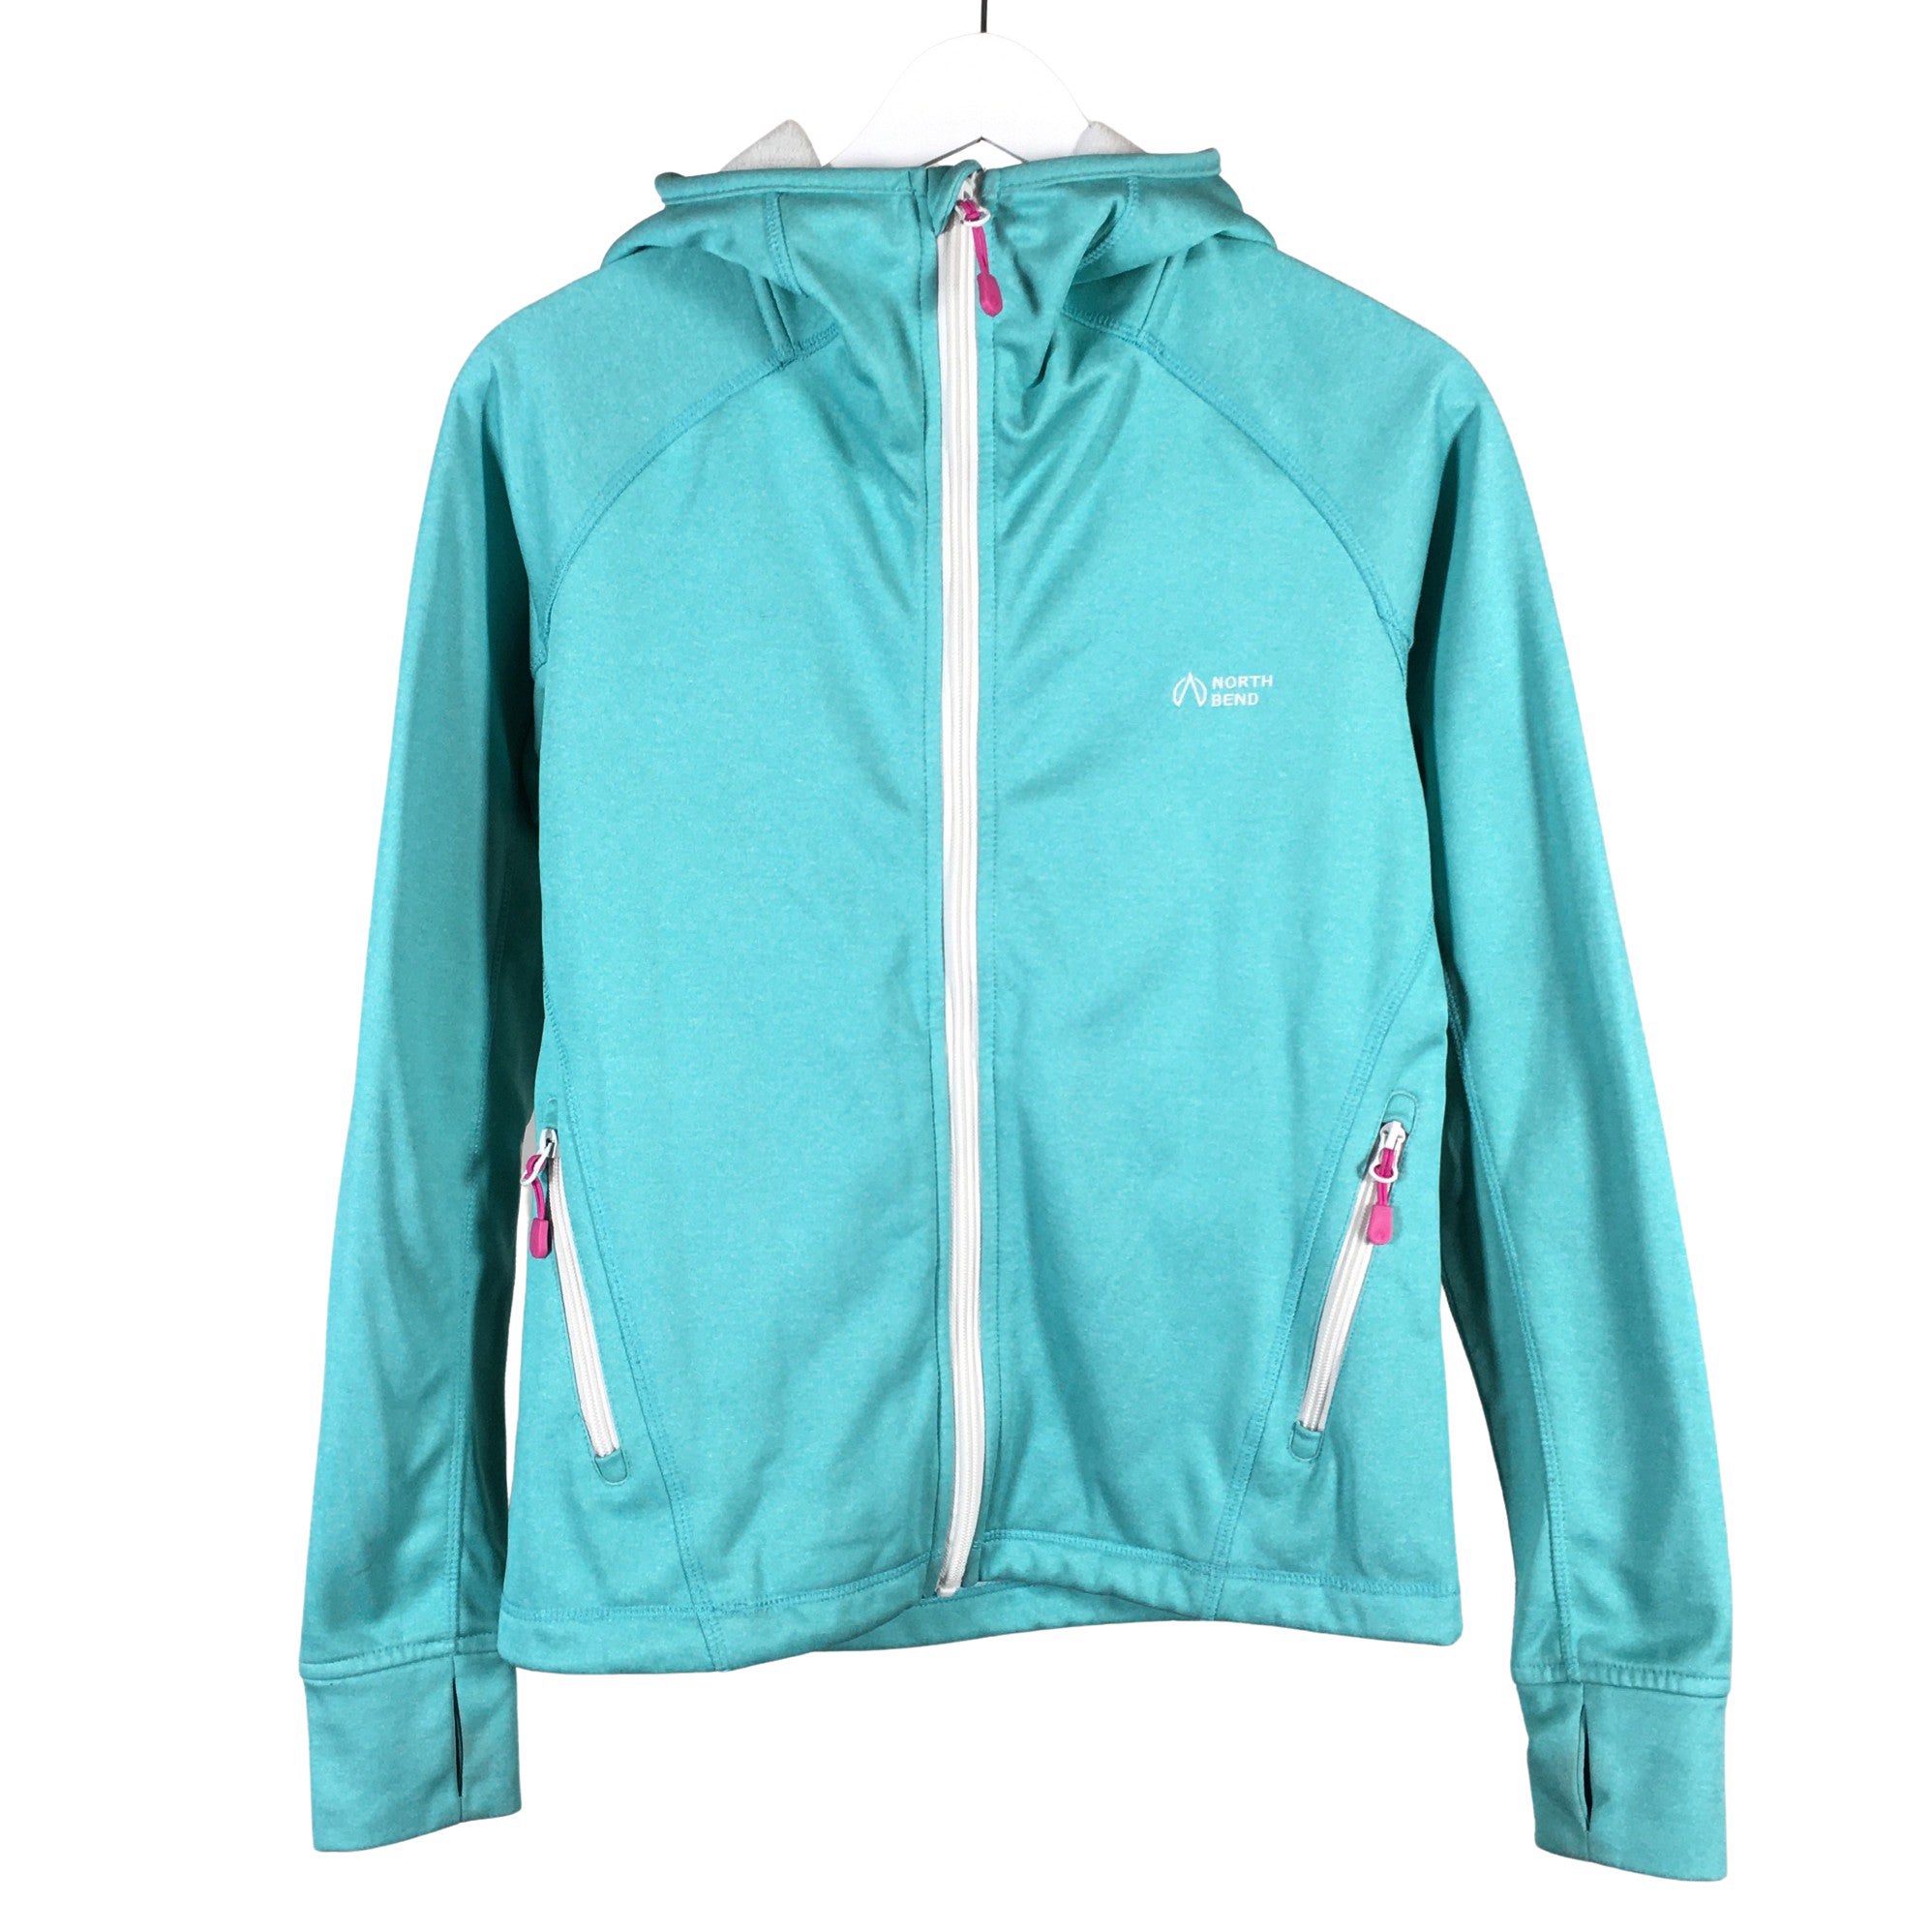 Women's North Bend jacket, size 38 (Turquoise) | Emmy